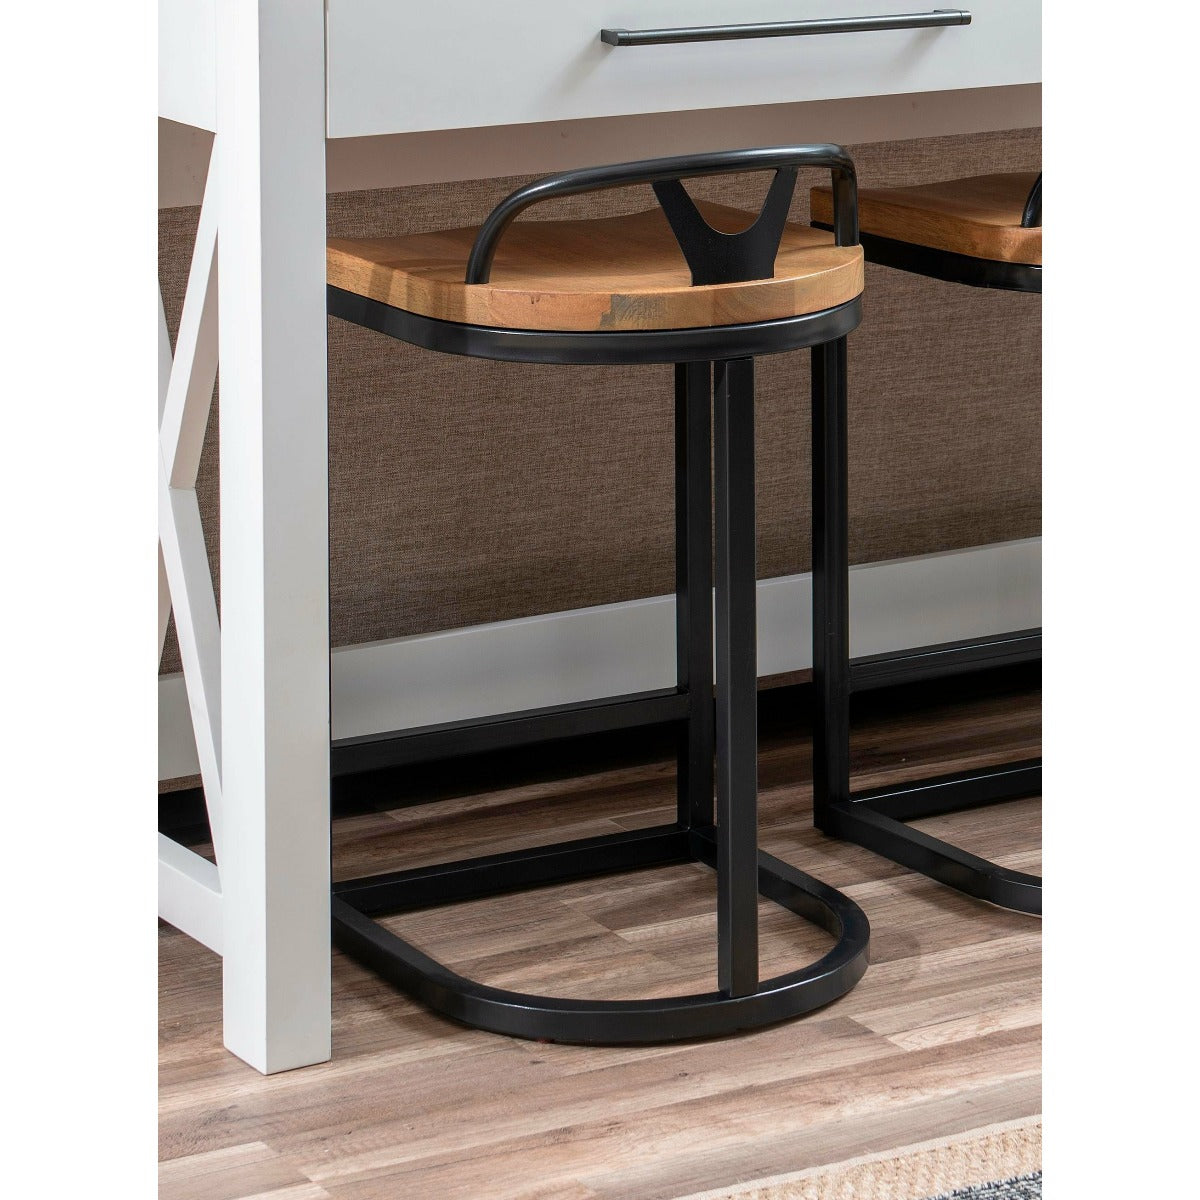 Franklin Sofa Table/Desk with Stools